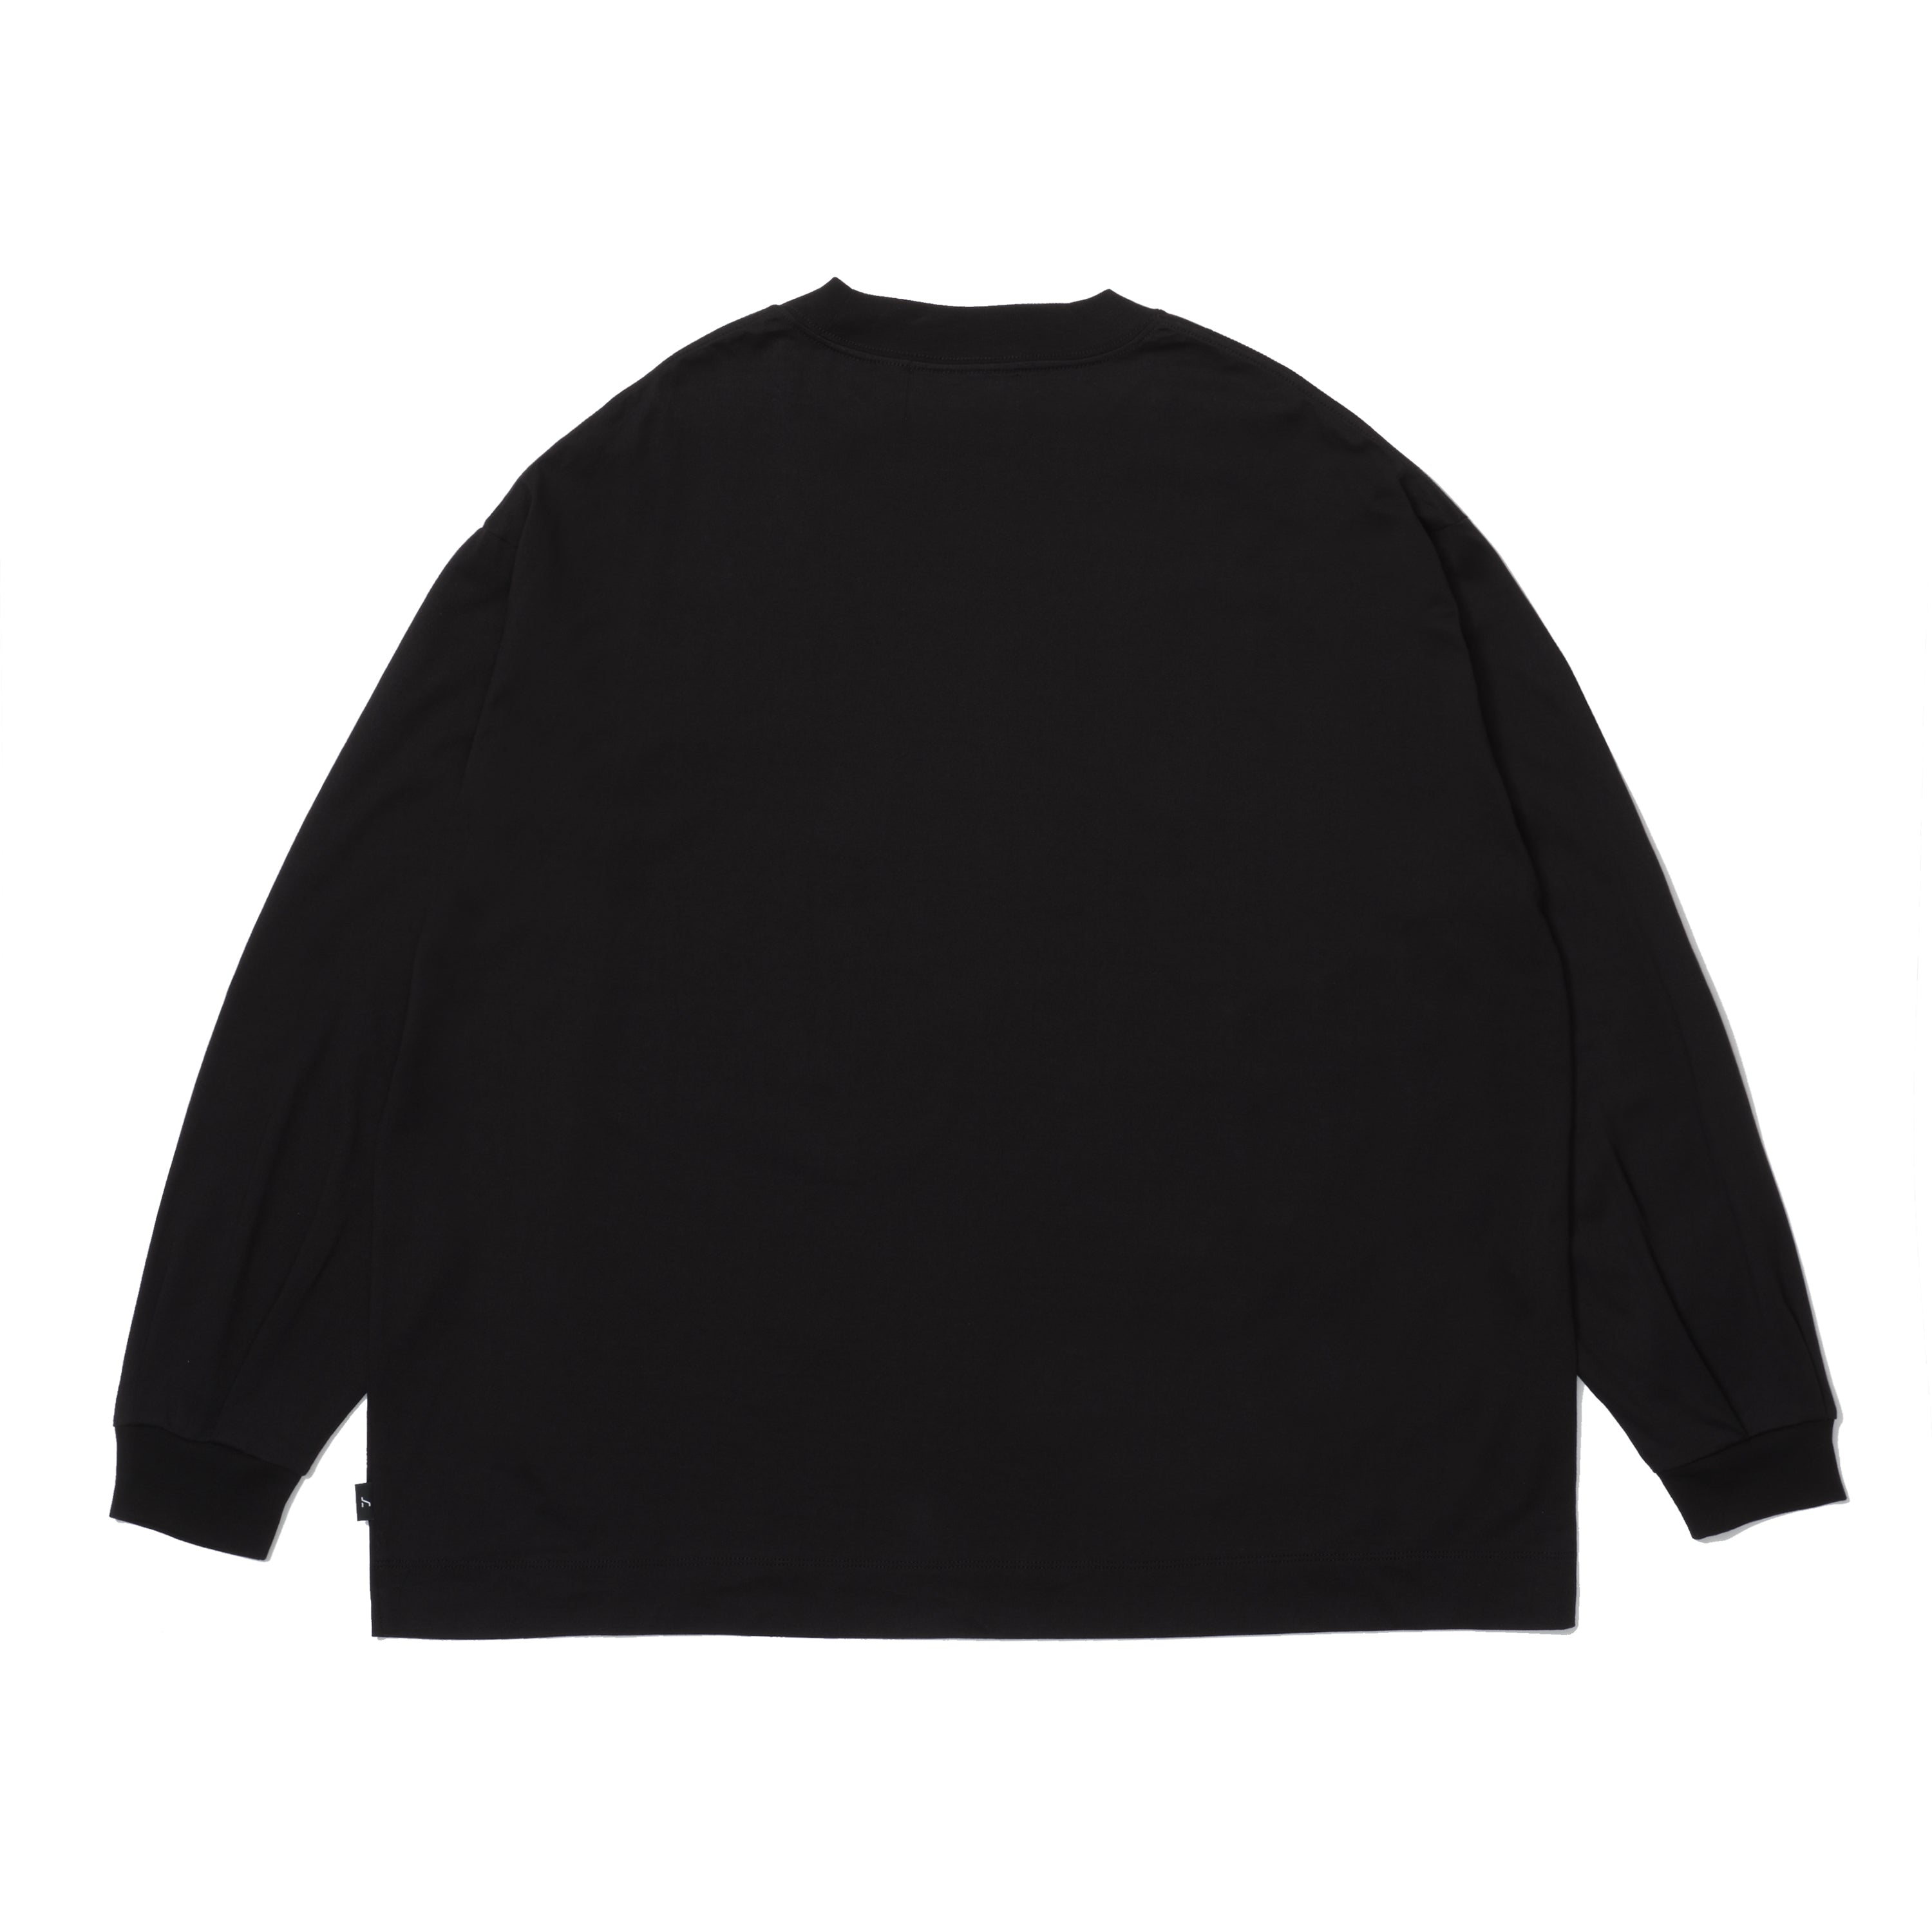 altared/Logo 3D Embroidery Organic Cotton Pleated Sleeve L/S T-Shirts[BLACK]